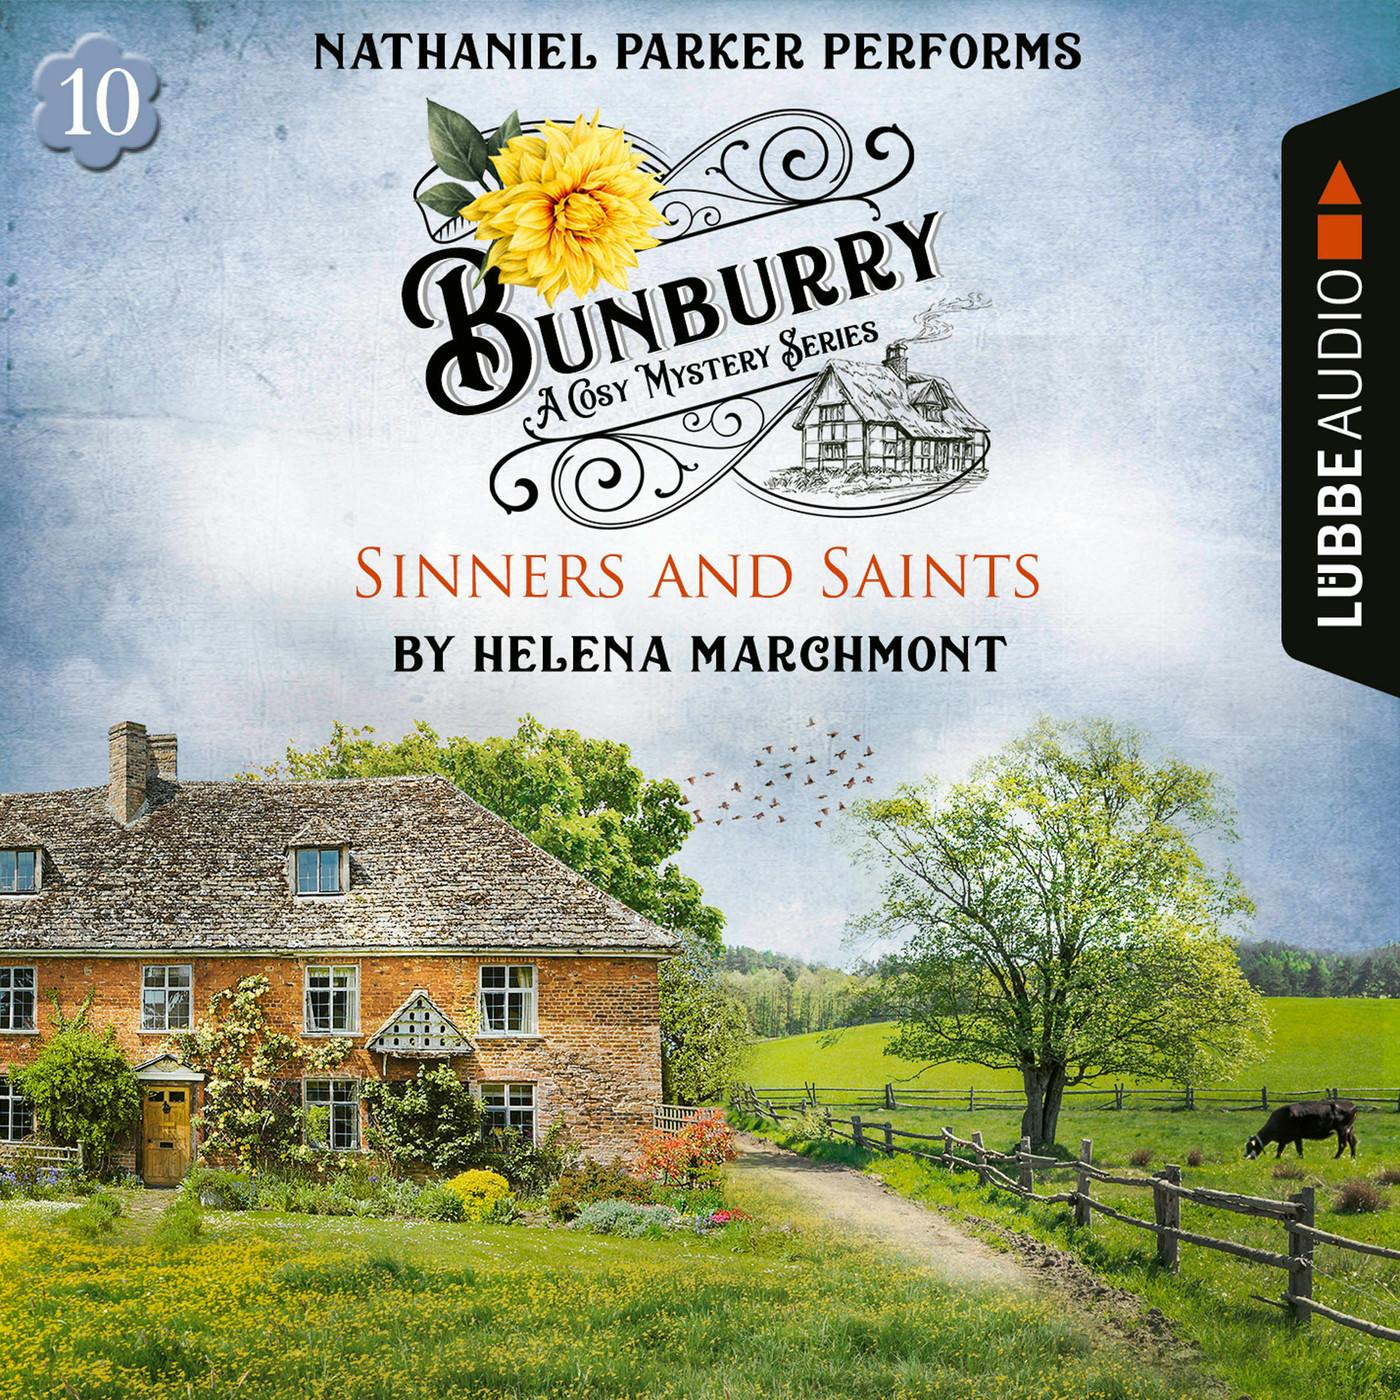 Sinners and Saints - Bunburry - A Cosy Mystery Series, Episode 10 (Unabridged) - Helena Marchmont